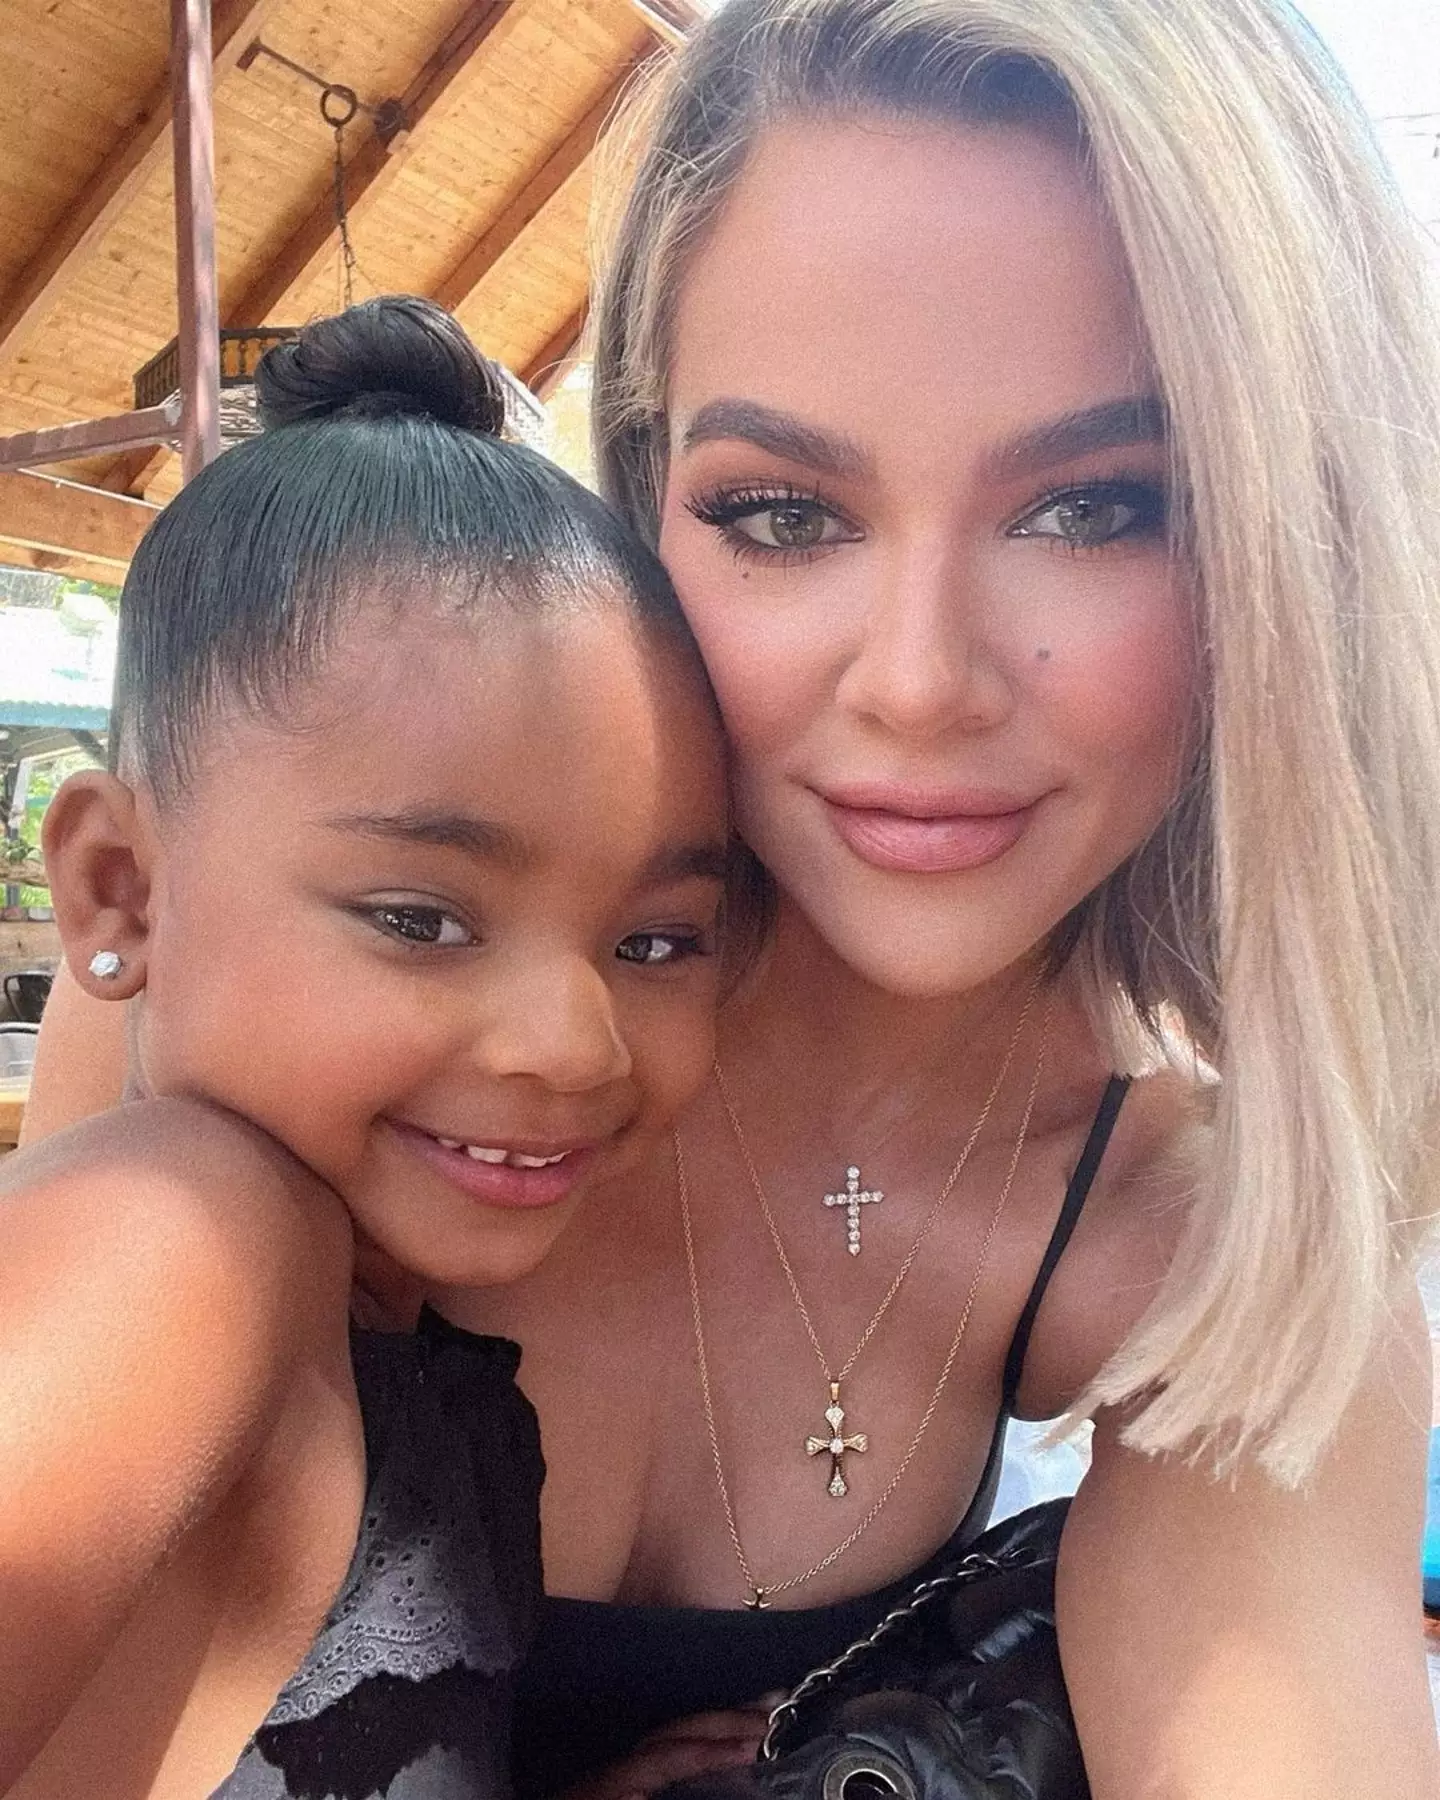 Khloé has opened up about being a mum-of-two.